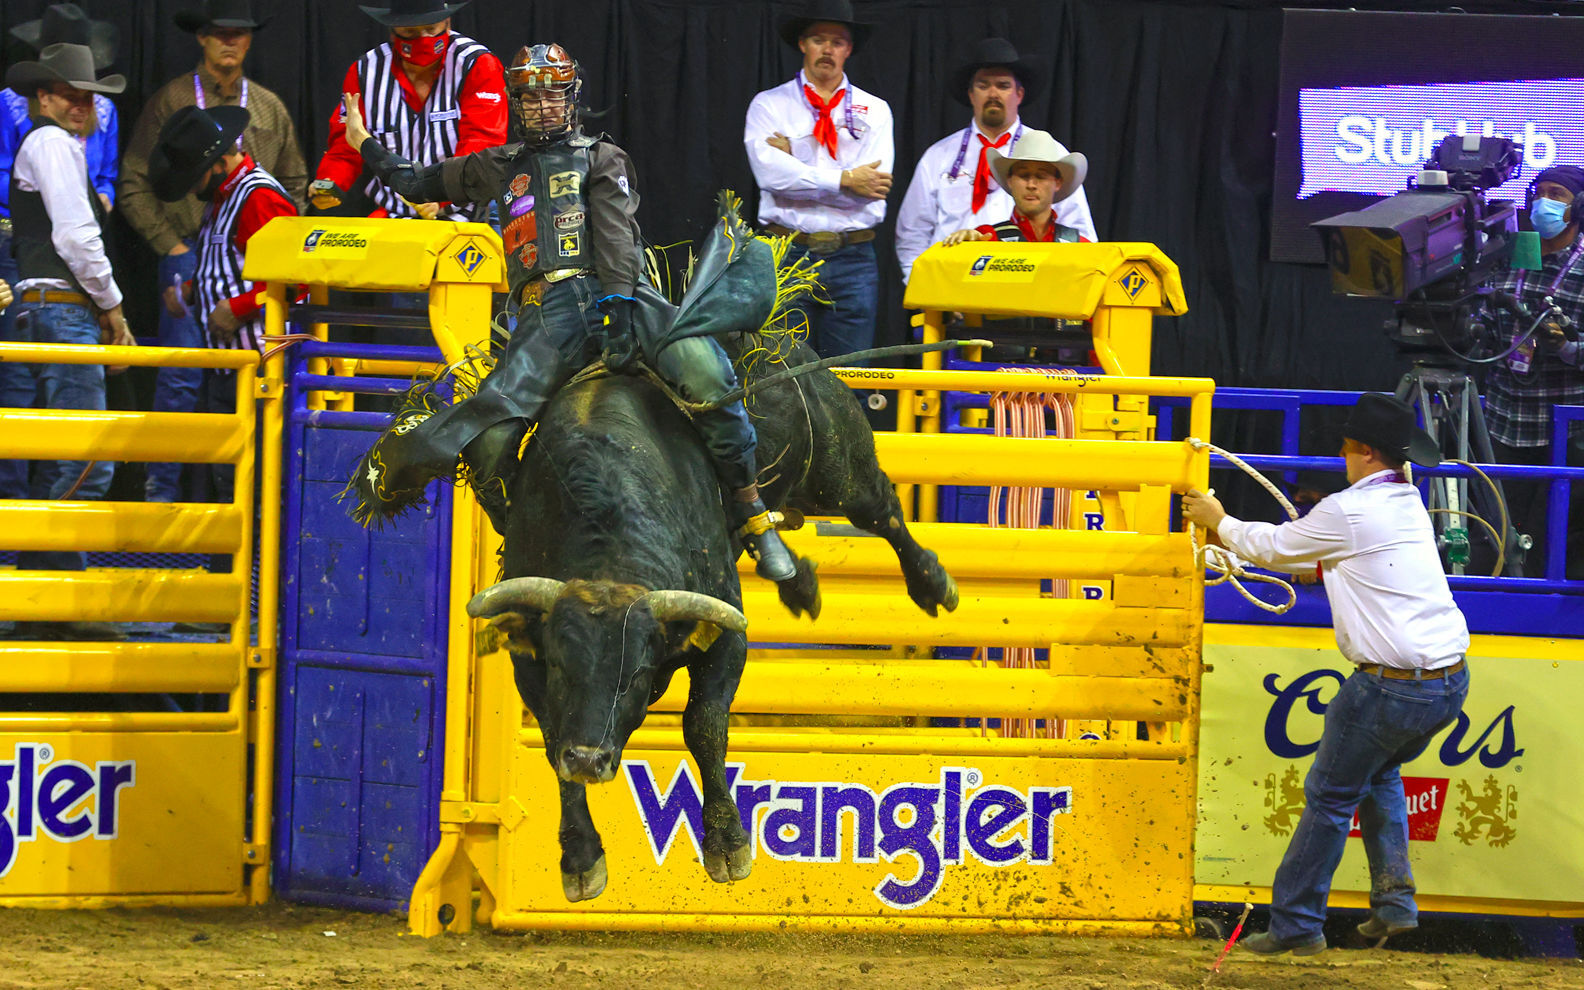 Bull rider Parker Breding hoping to get his rodeo 'groove' back